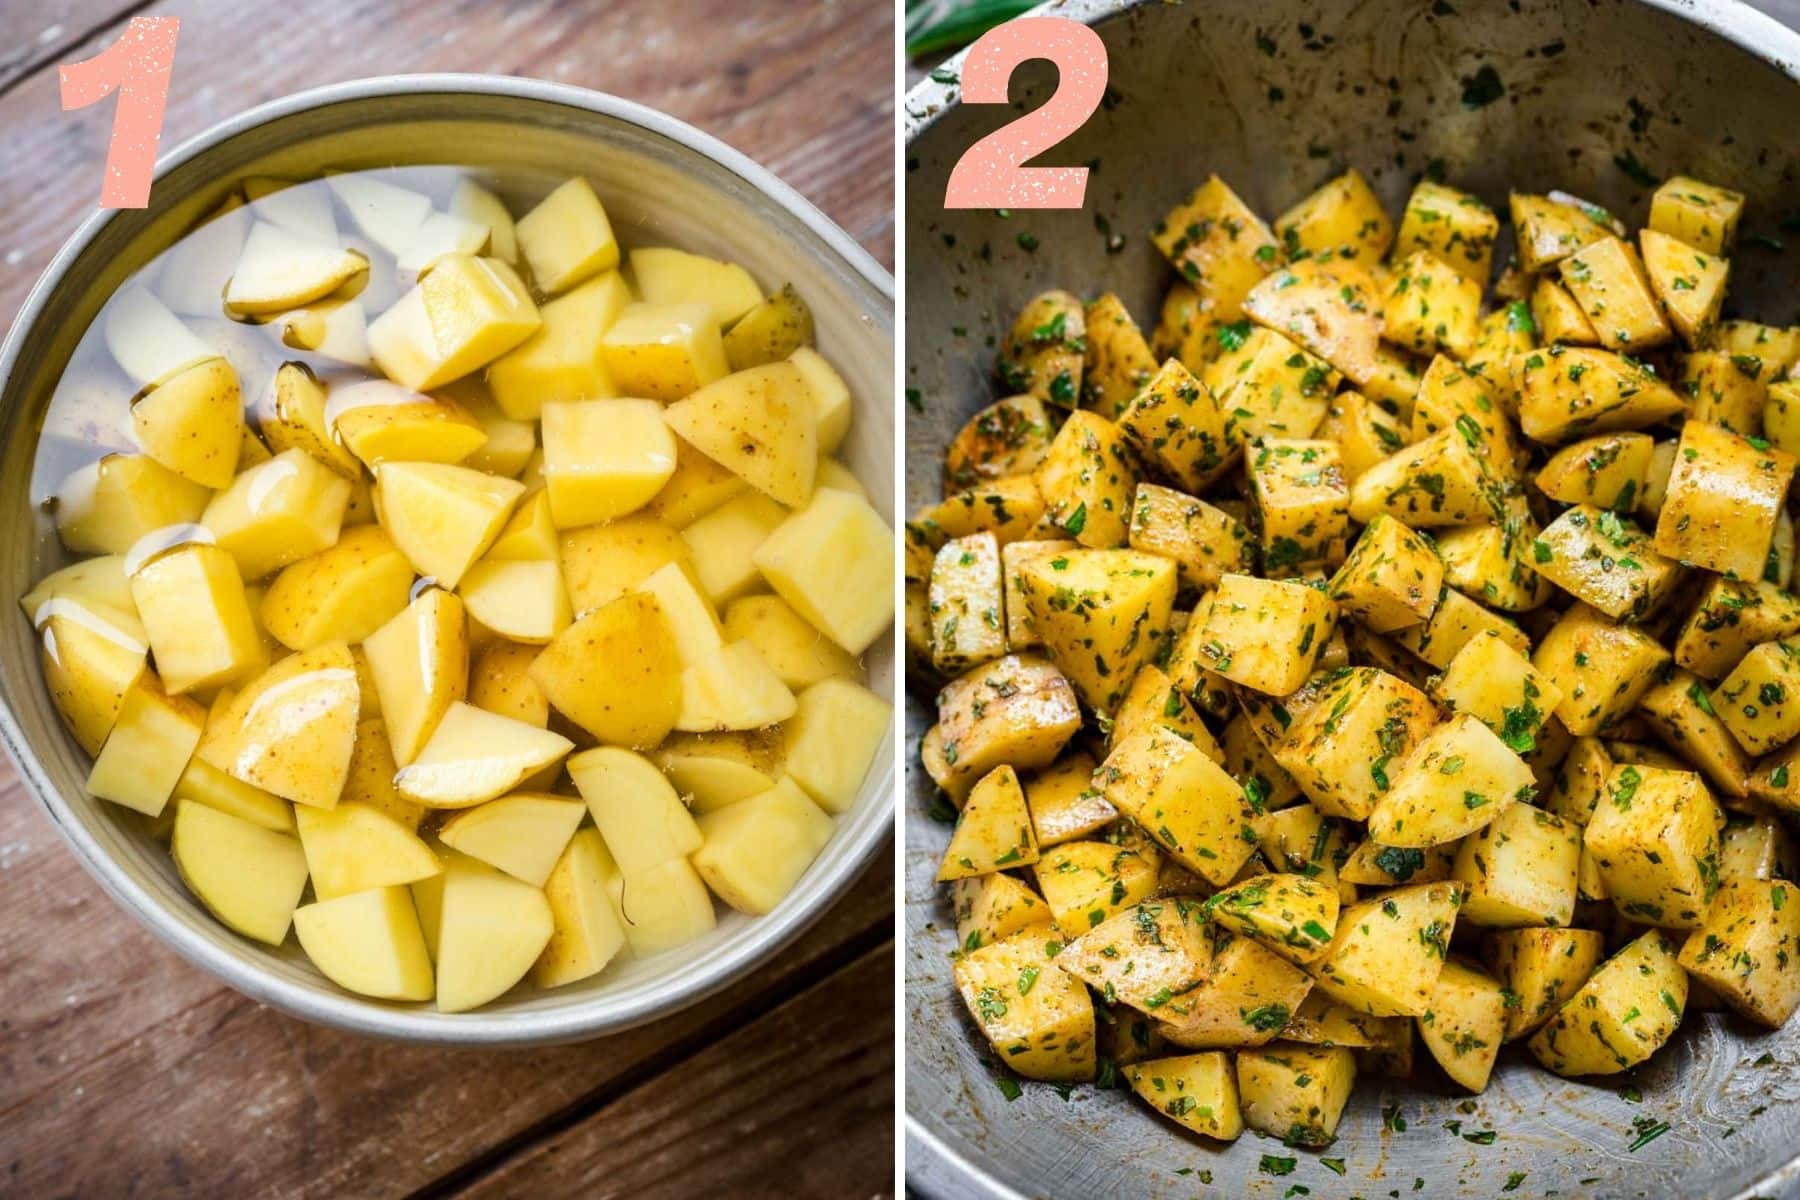 On the left: potatoes soaking in cold water. On the right: Potatoes tossed in herbs.